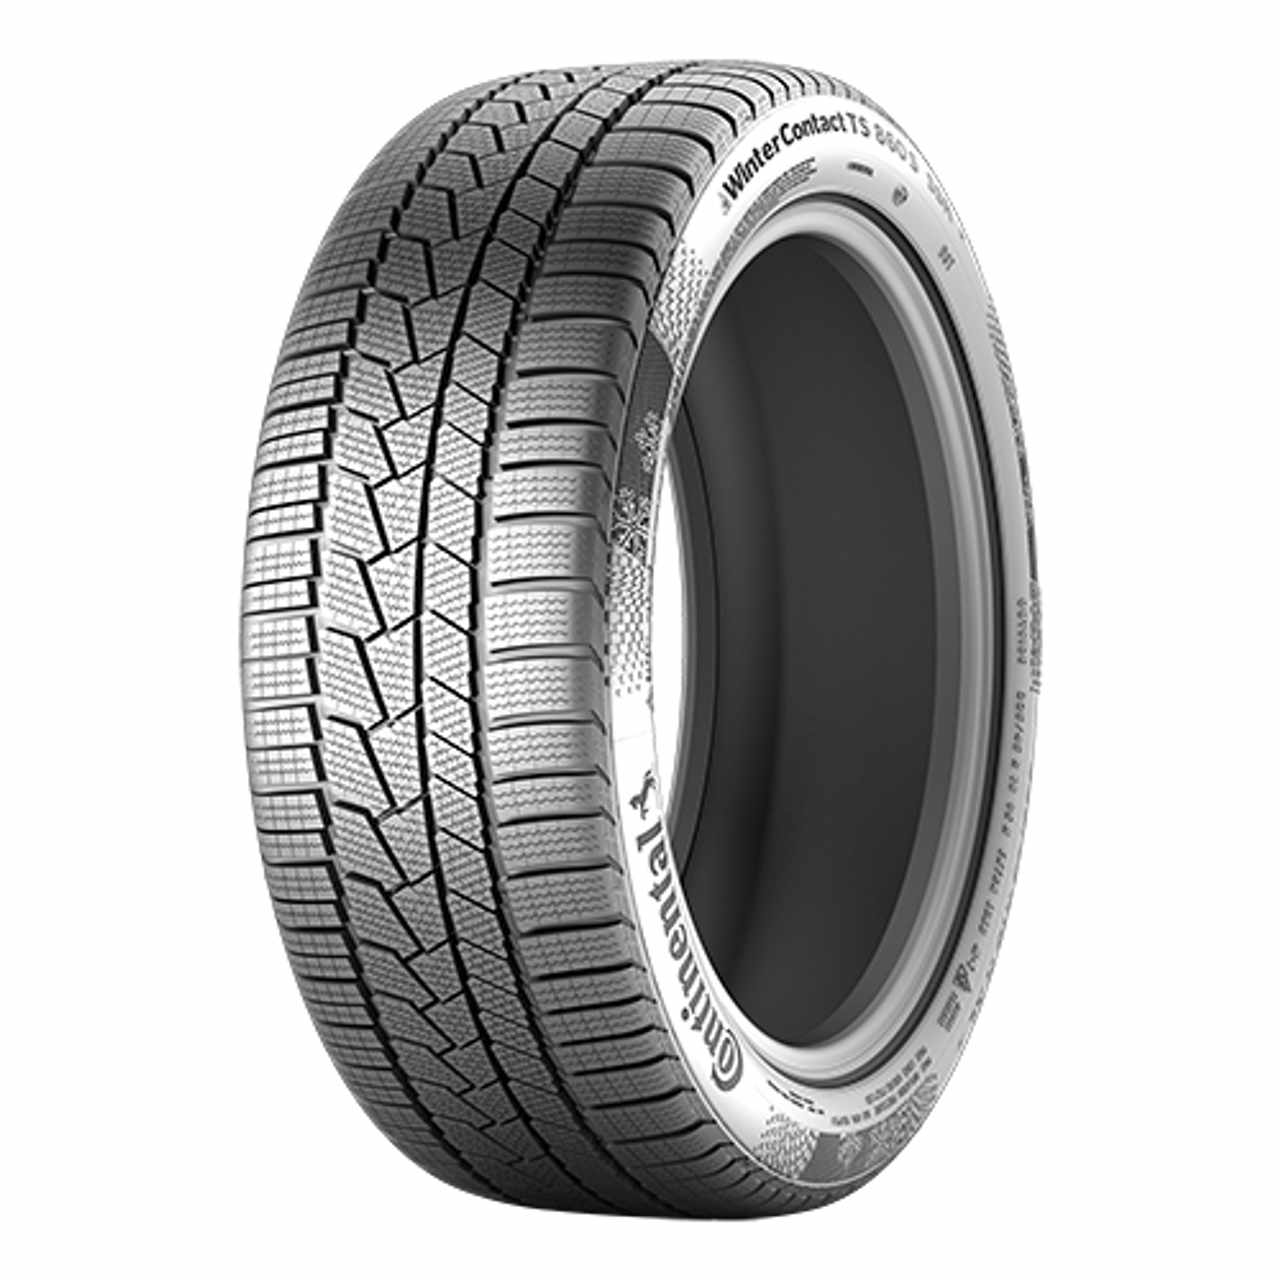 CONTINENTAL WINTERCONTACT TS 860 S (EVc) 265/35R21 101W FR BSW von Continental